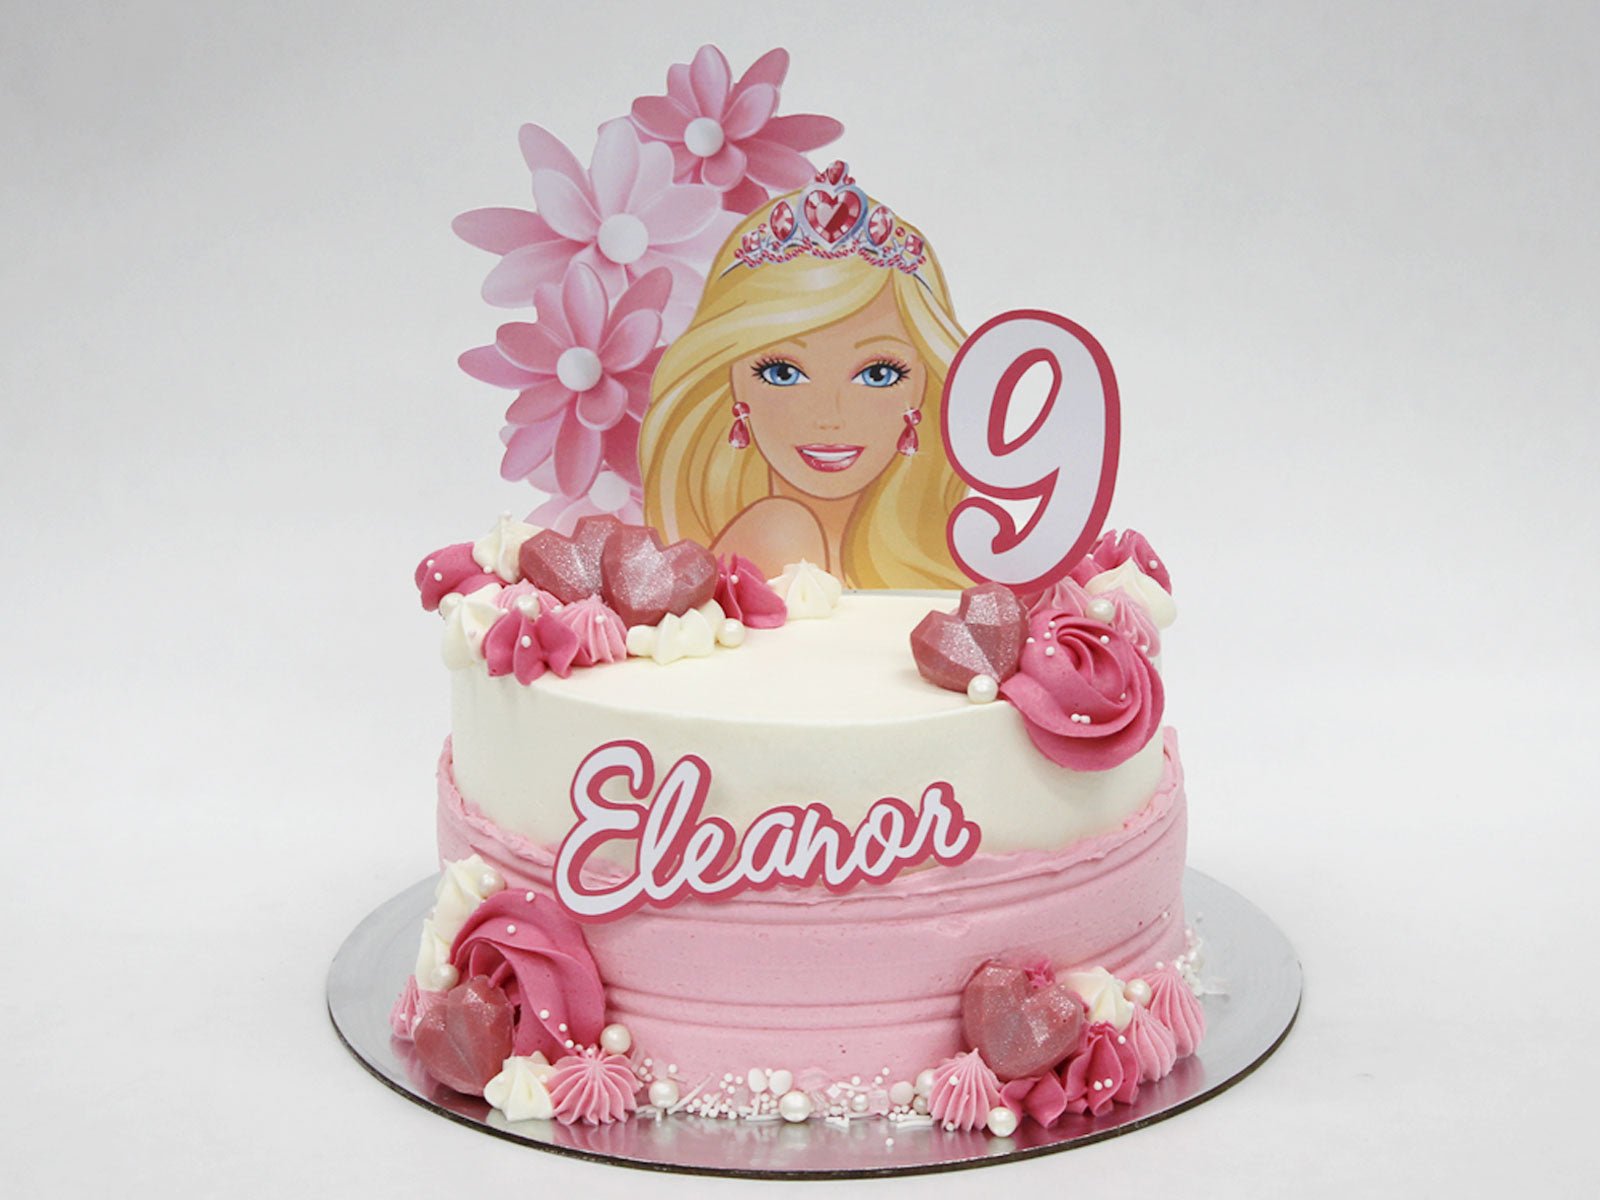 Barbie Character Cake – The Cake People